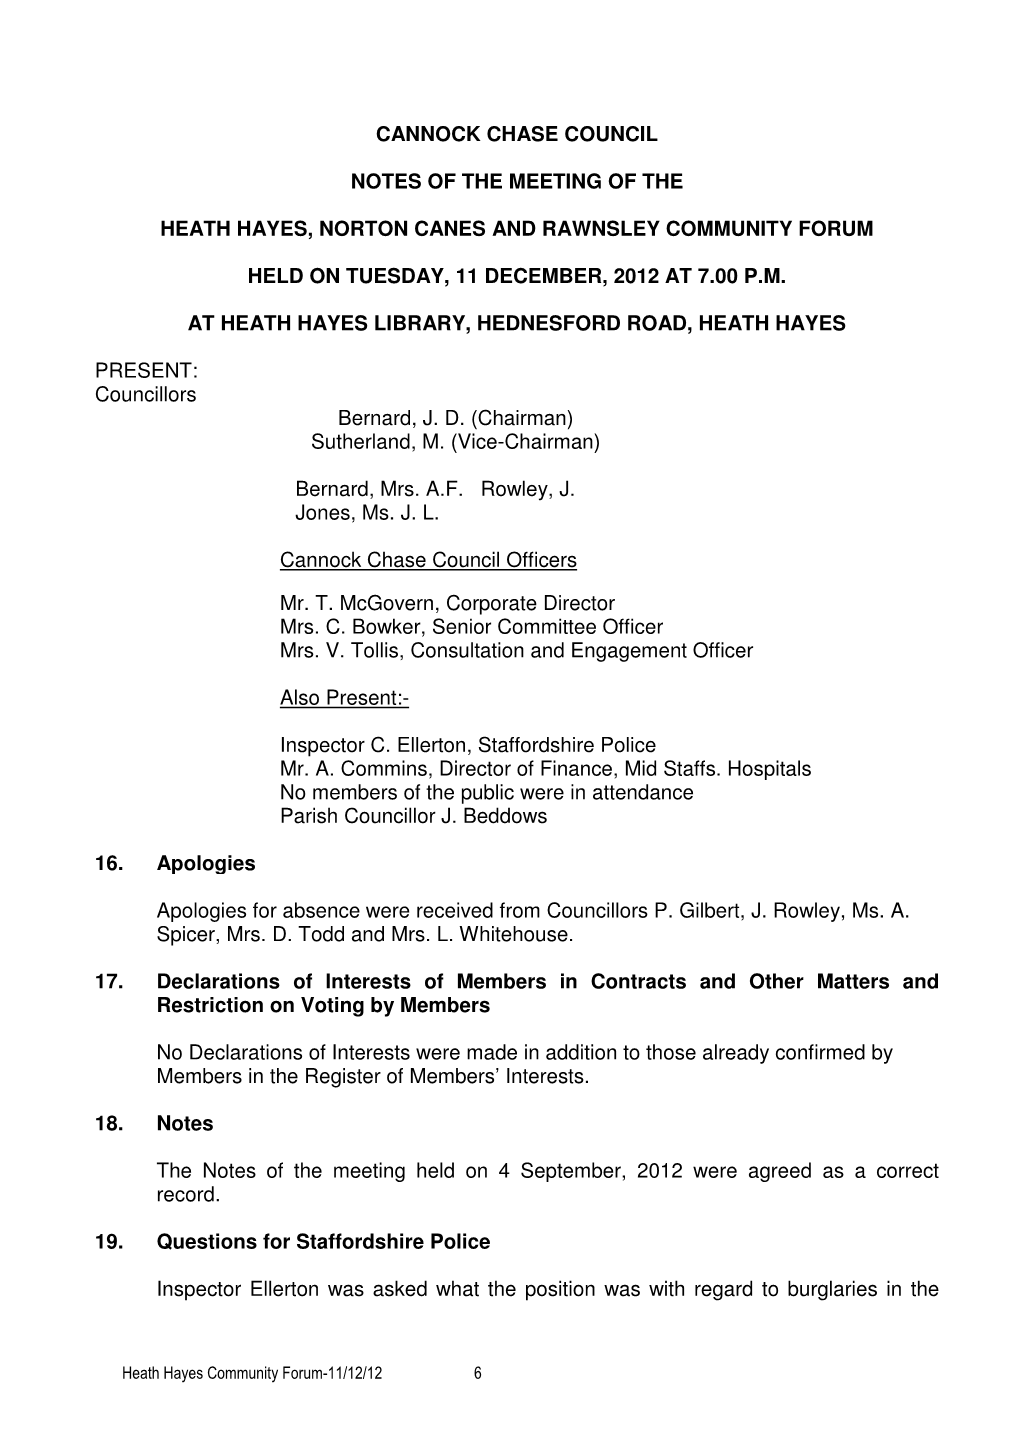 Cannock Chase Council Notes of the Meeting of the Heath